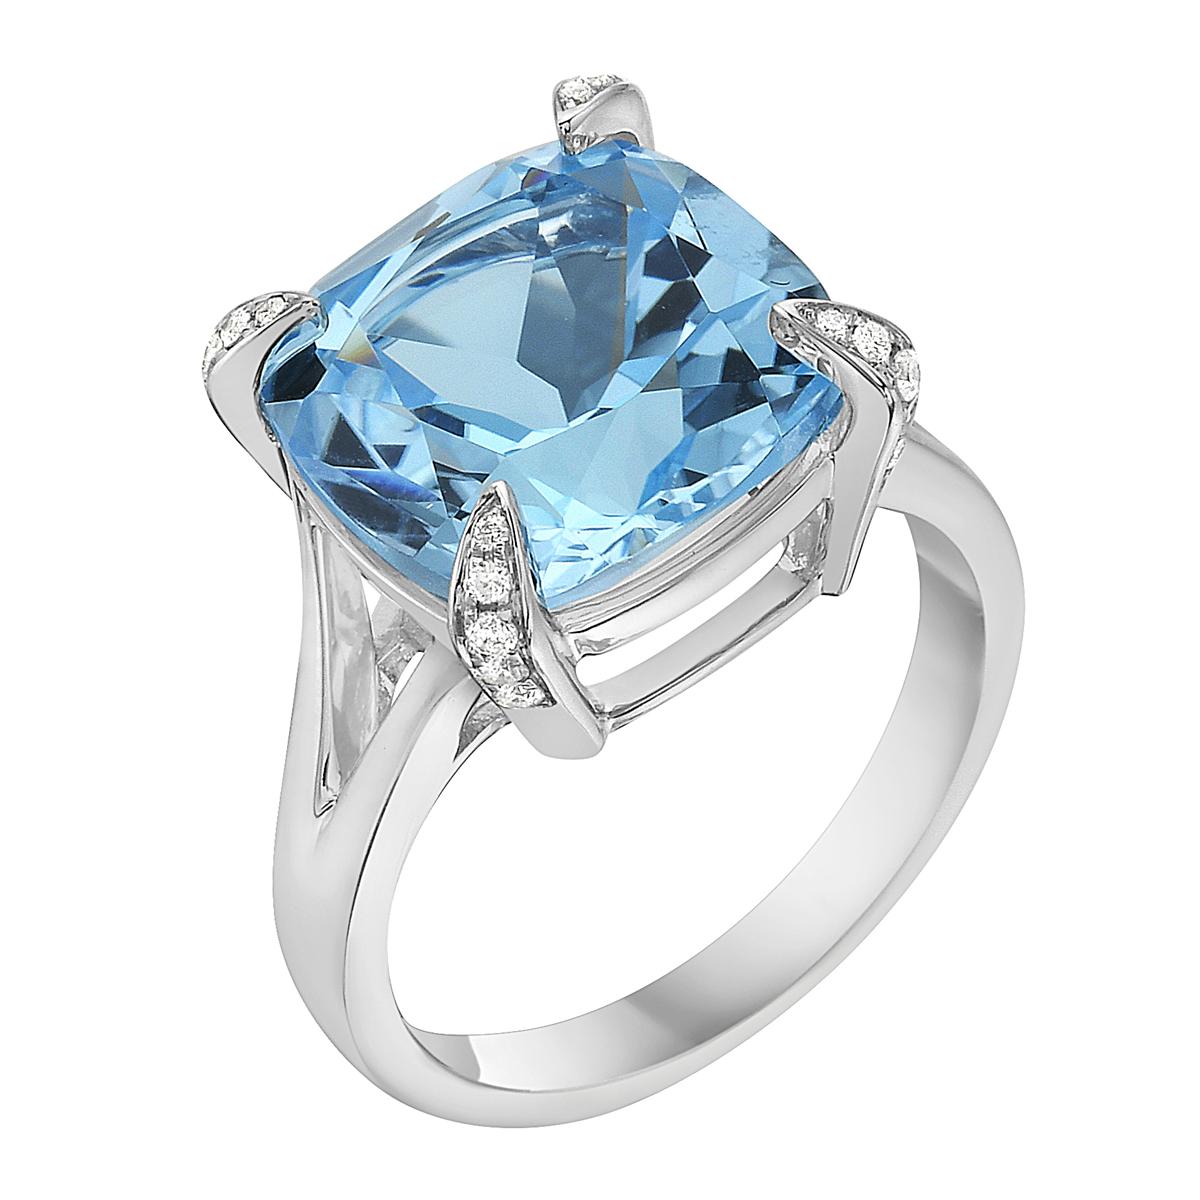 With this exquisite semi-precious sky blue topaz ring, style and glamour are in the spotlight. This 14-karat cushion cut ring is made from 4.7 grams of gold, 1 sky blue topaz totaling 8.69 karats, and is surrounded by 20 round SI1-SI2, GH color